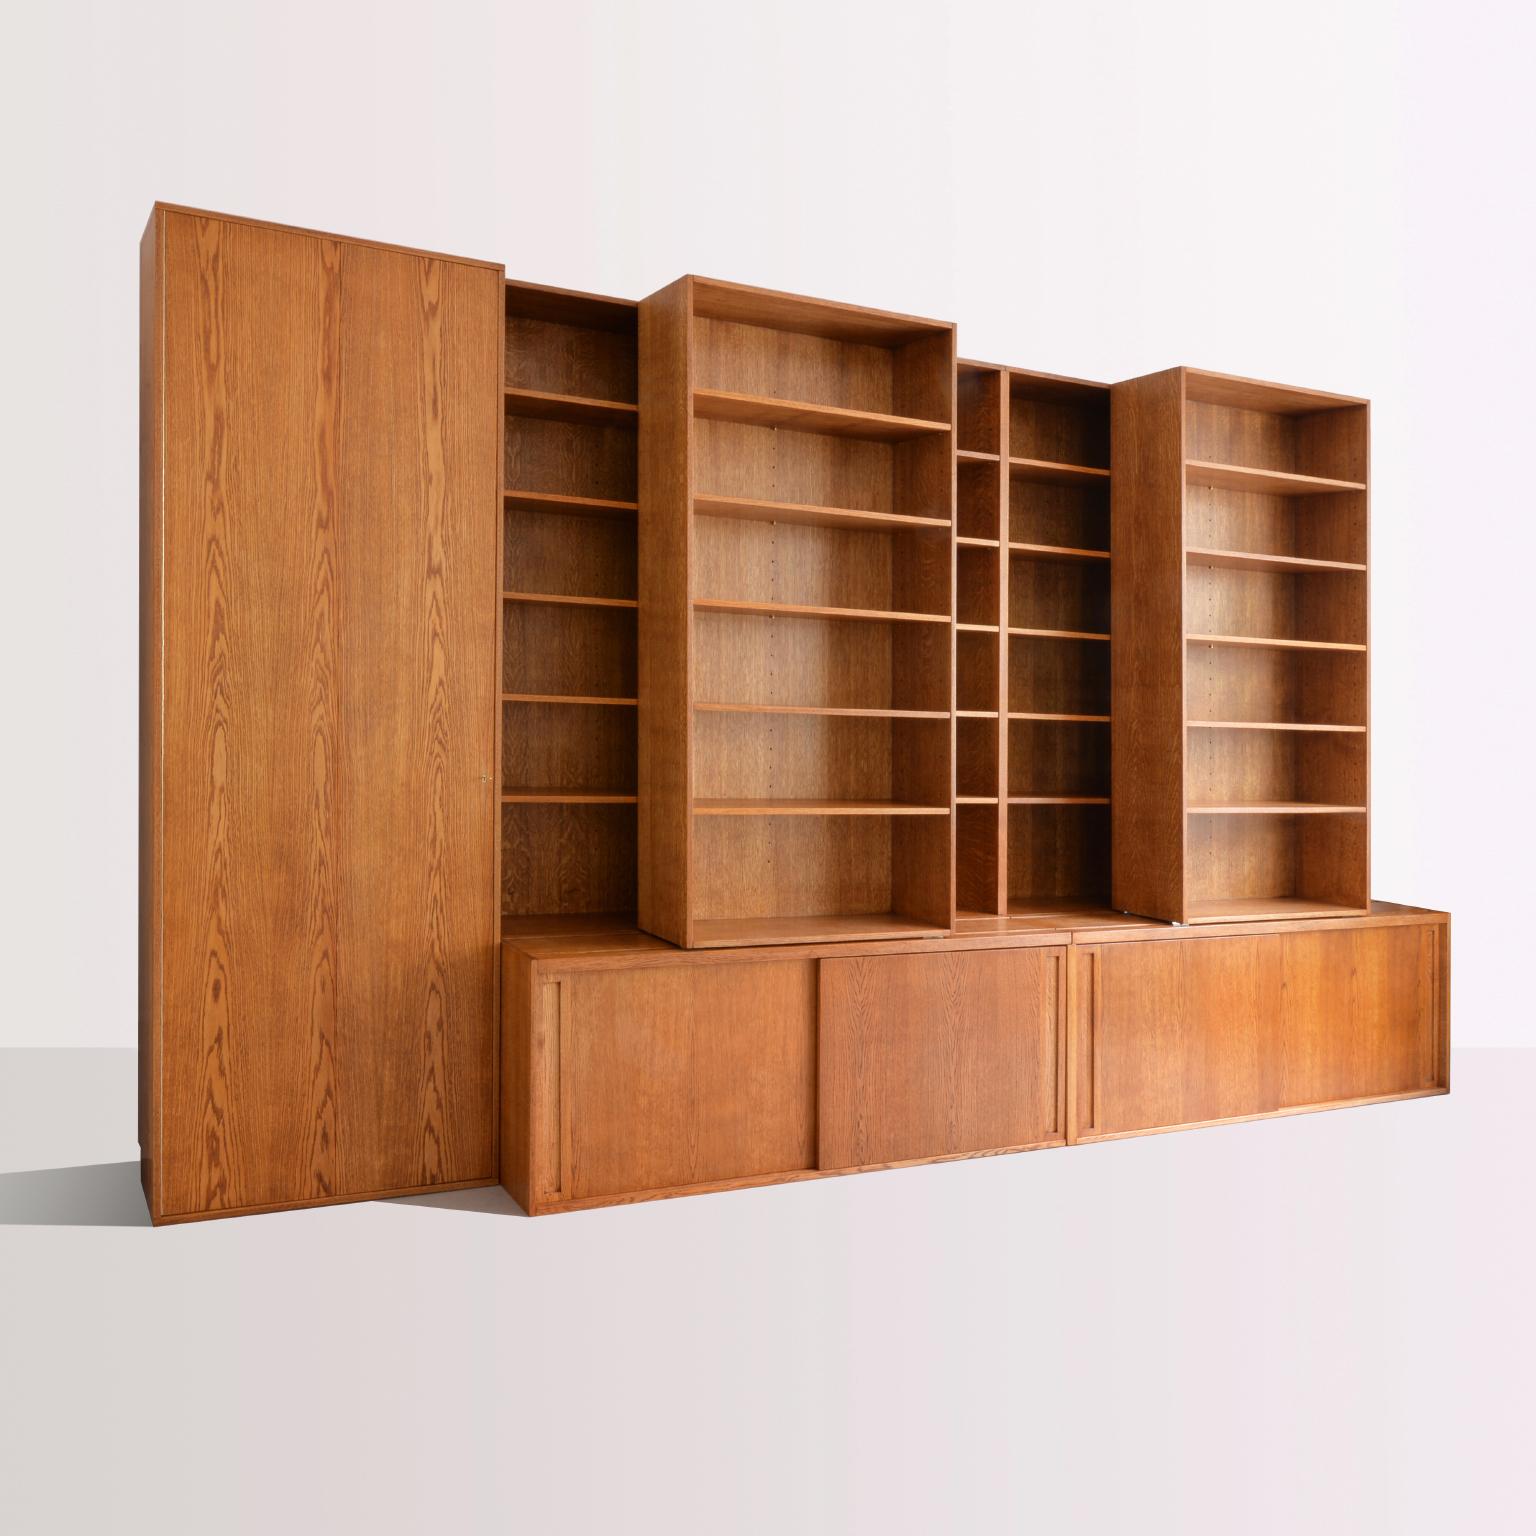 Customized bookshelf in handcrafted wood with sliding and adjustable shelves. The Minimalist contemporary look make it versatile for different kind of interiors and style combinations. The bookshelf is disponible in natural, stained or painted wood.